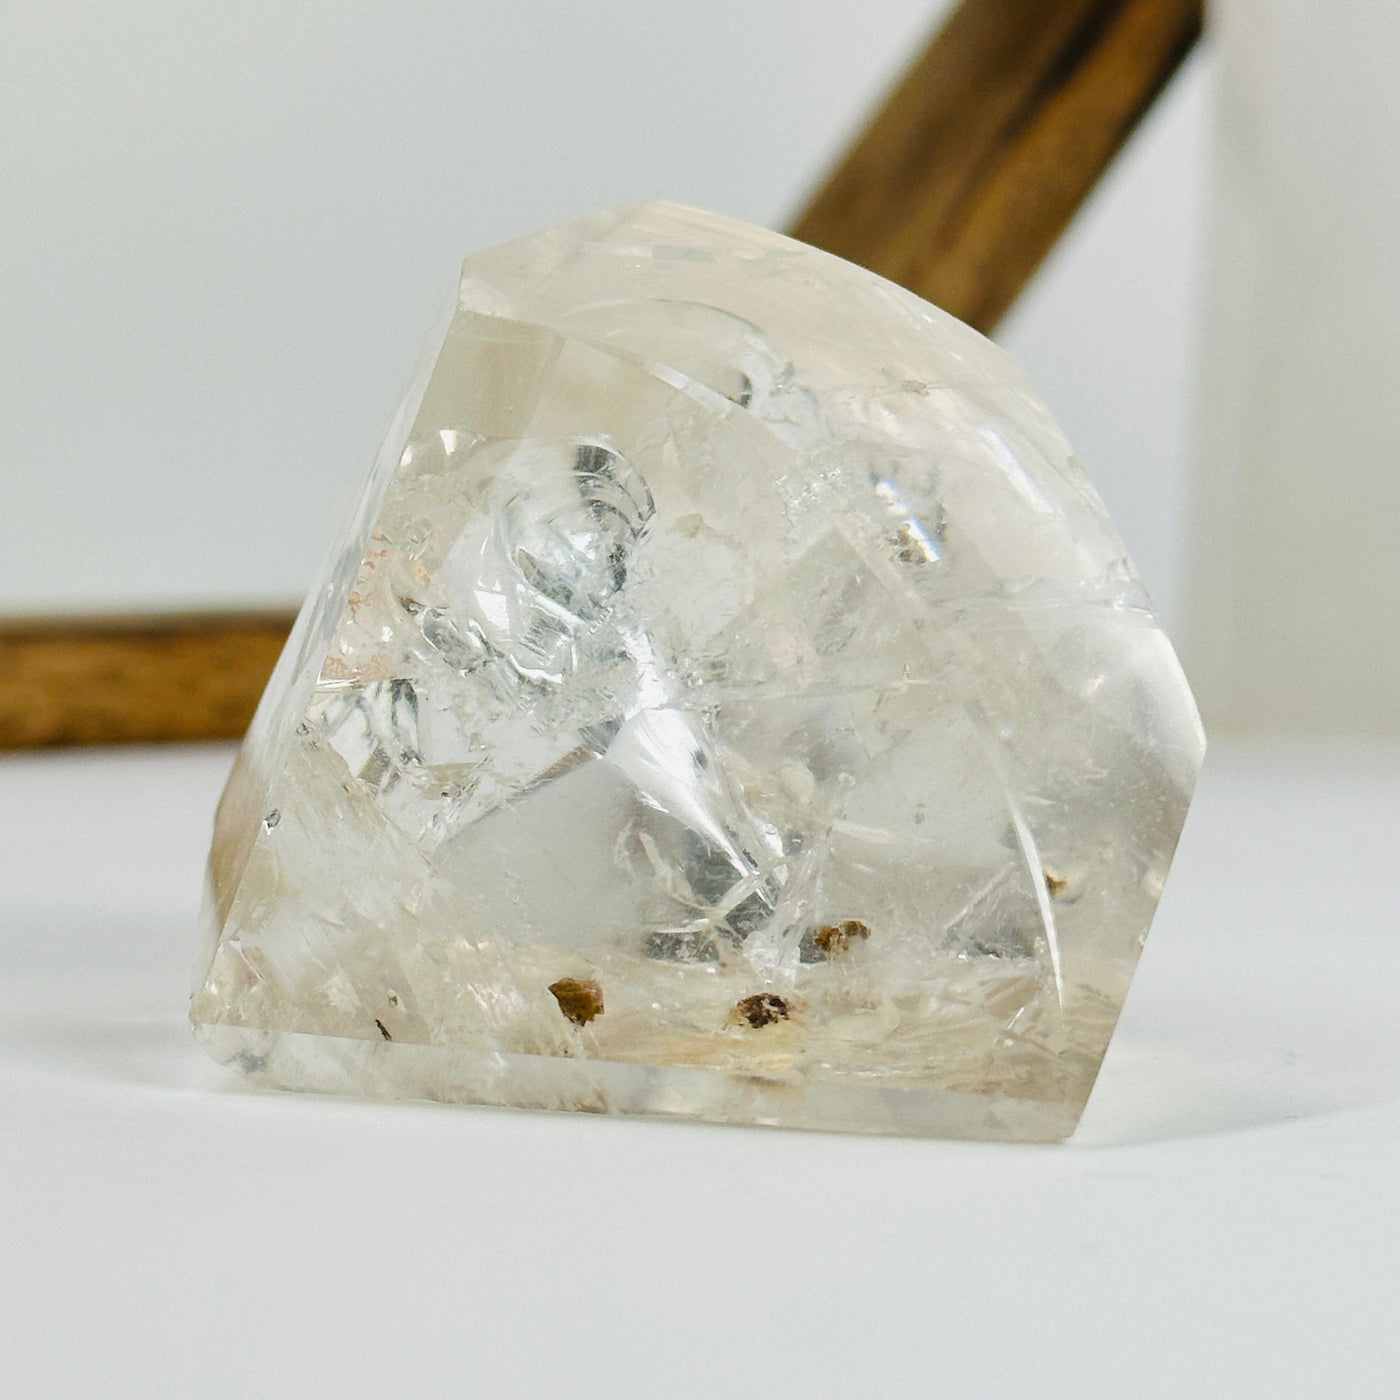 polished crystal quartz with inclusions with decorations in the background